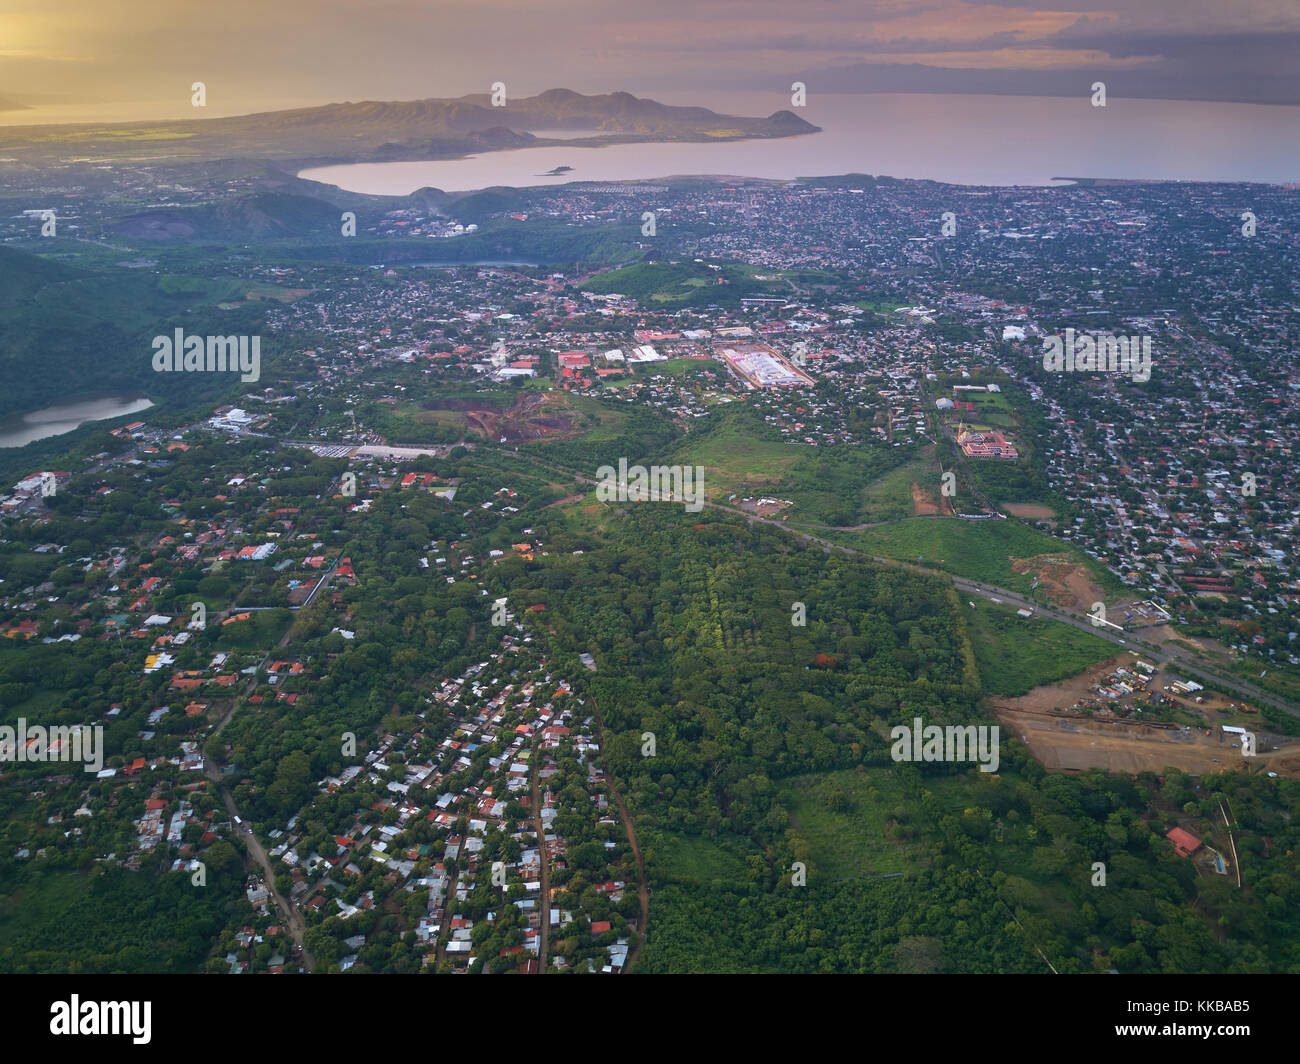 Managua central america capital aerial drone view. City around hiils and lagoons Stock Photo